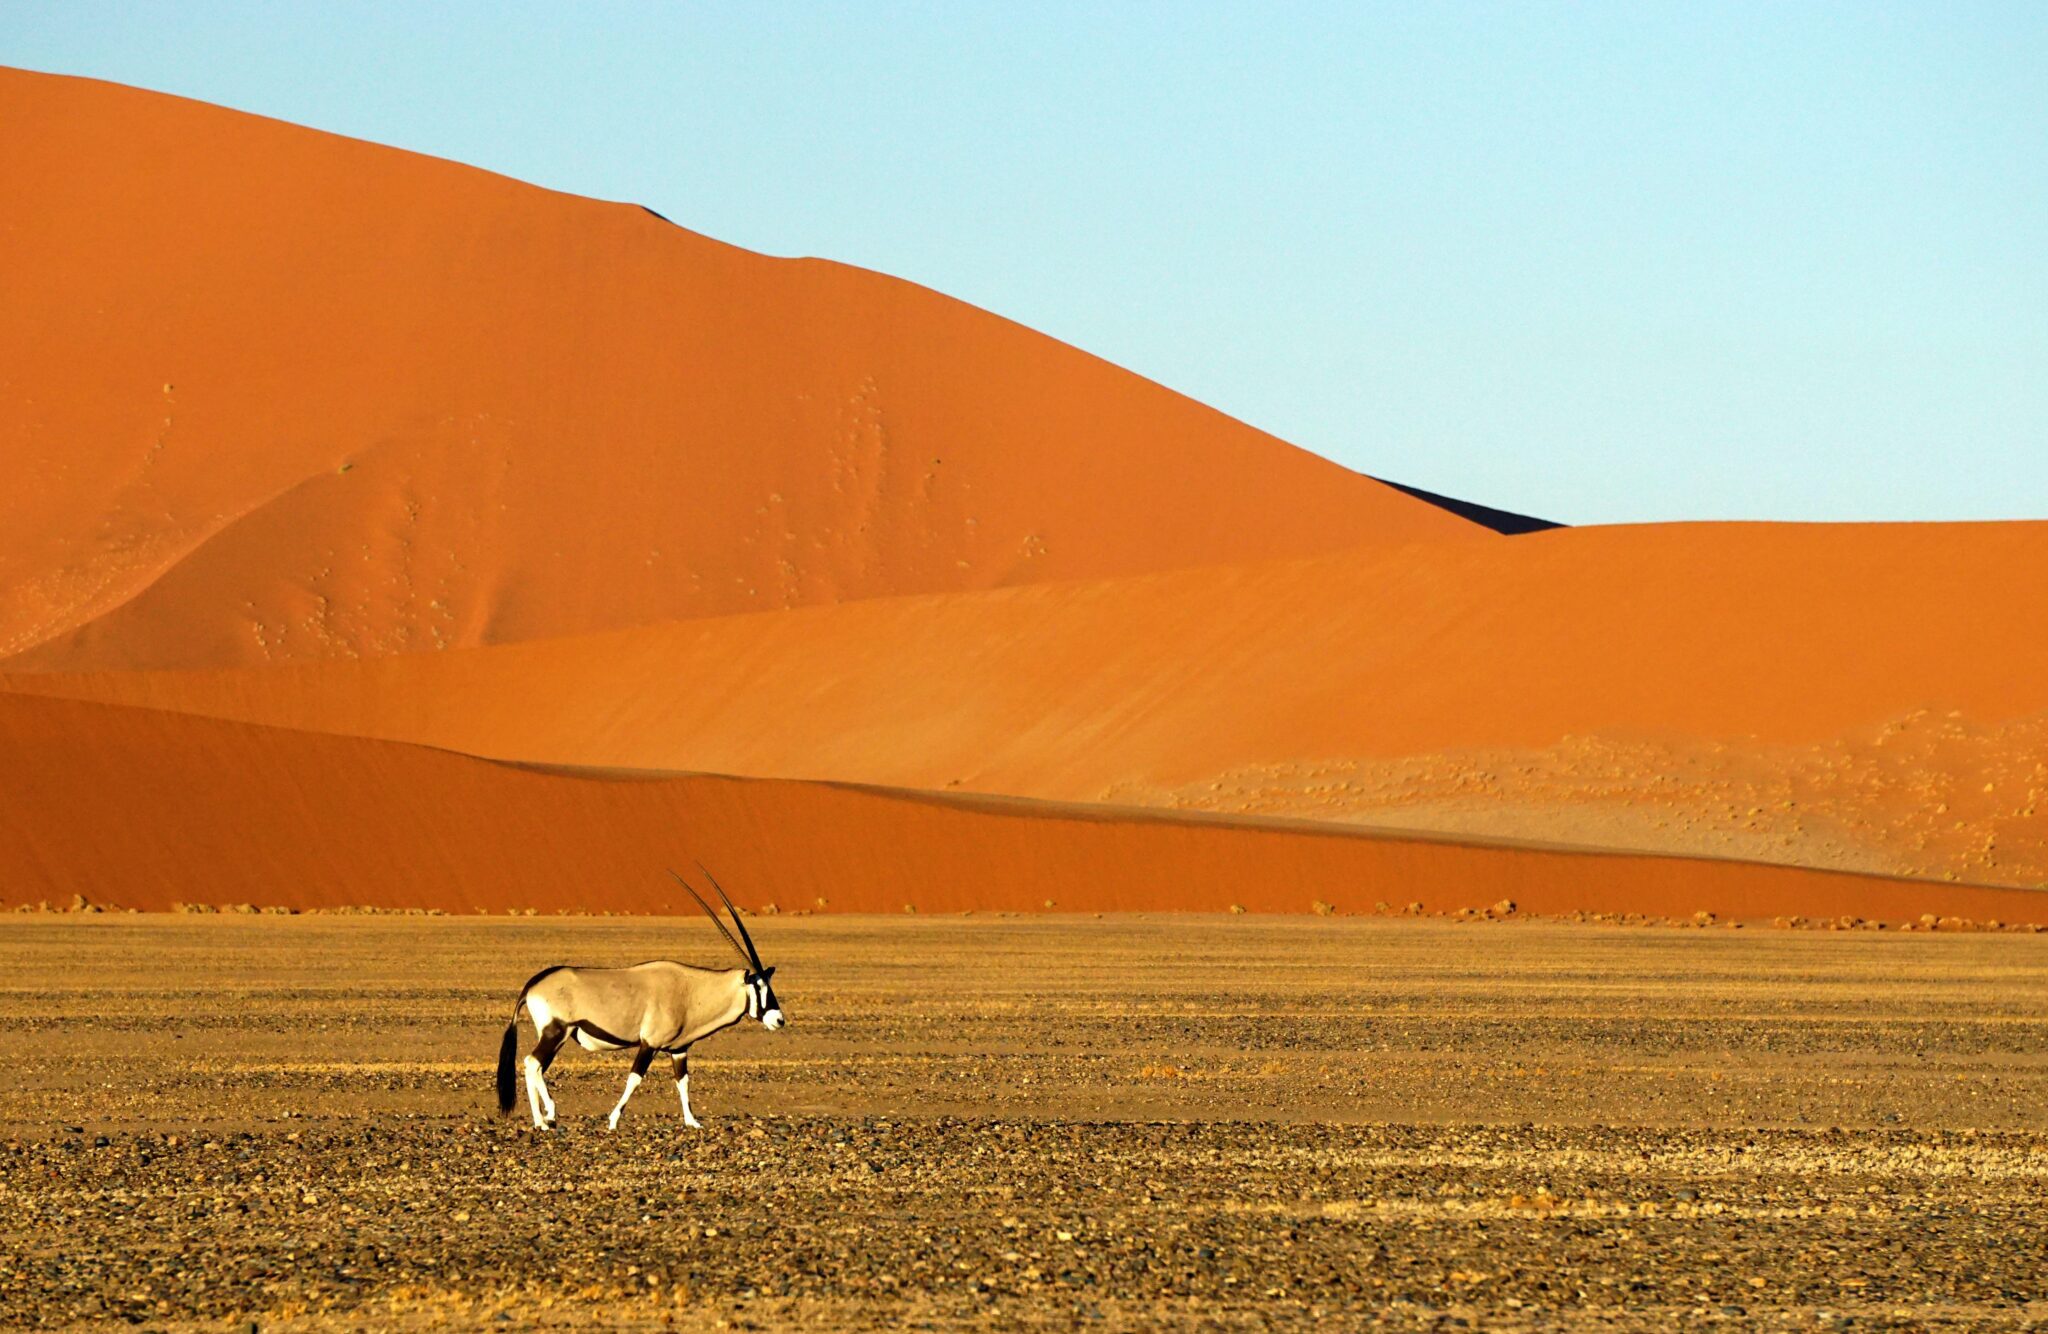 Namibia – Home of Extreme Landscapes